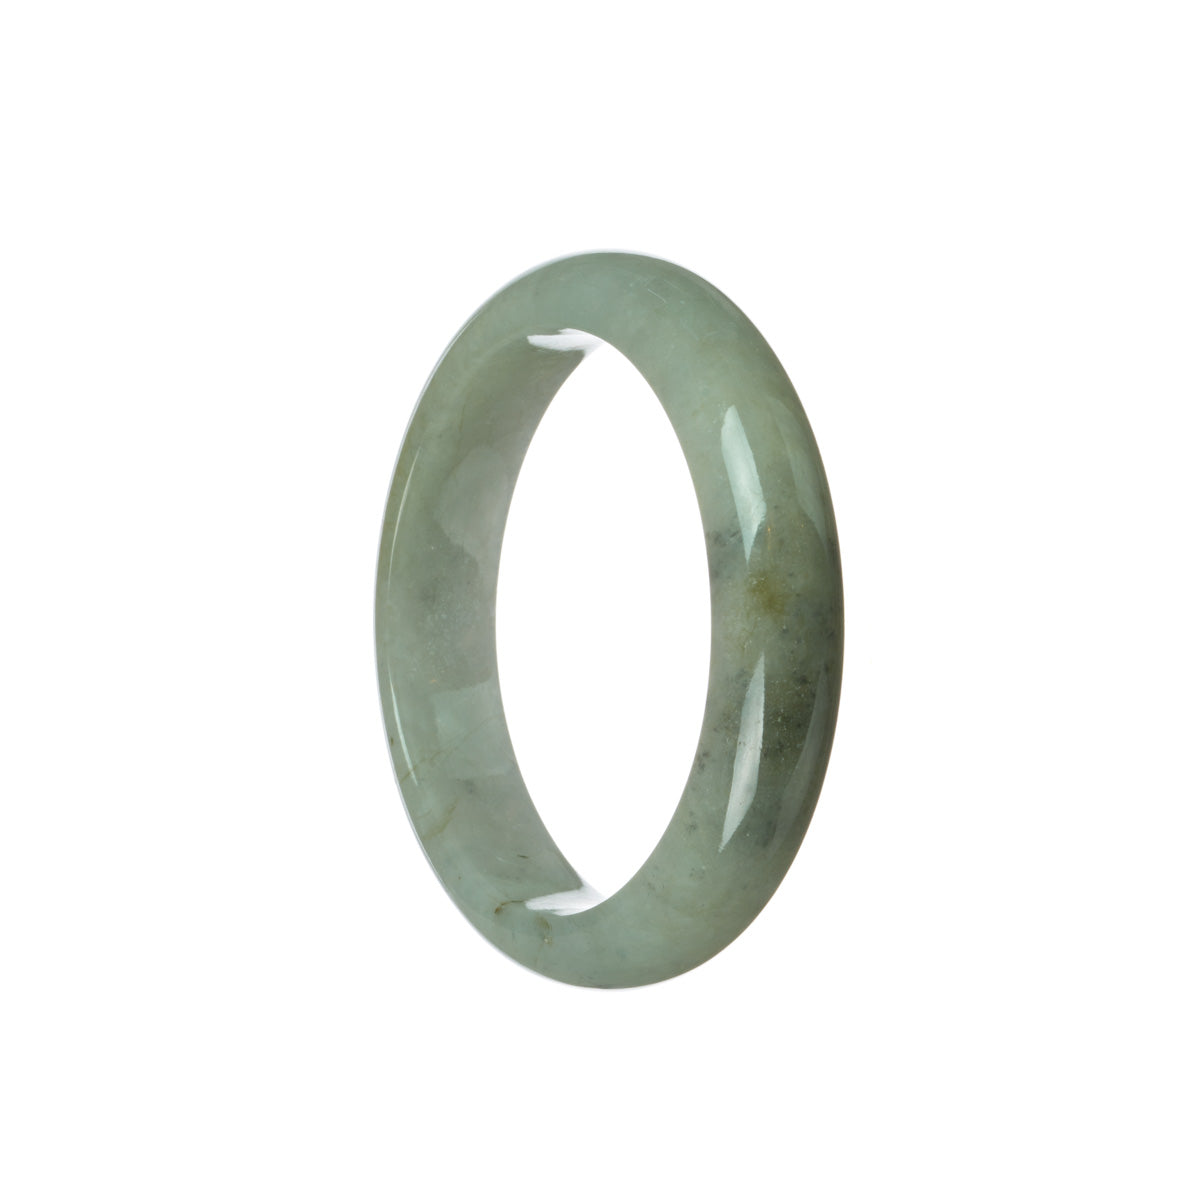 A close-up image of a light grey Burma Jade bangle with a smooth, semi-round shape. The bangle has a high-quality grade A rating and measures 55mm in diameter.